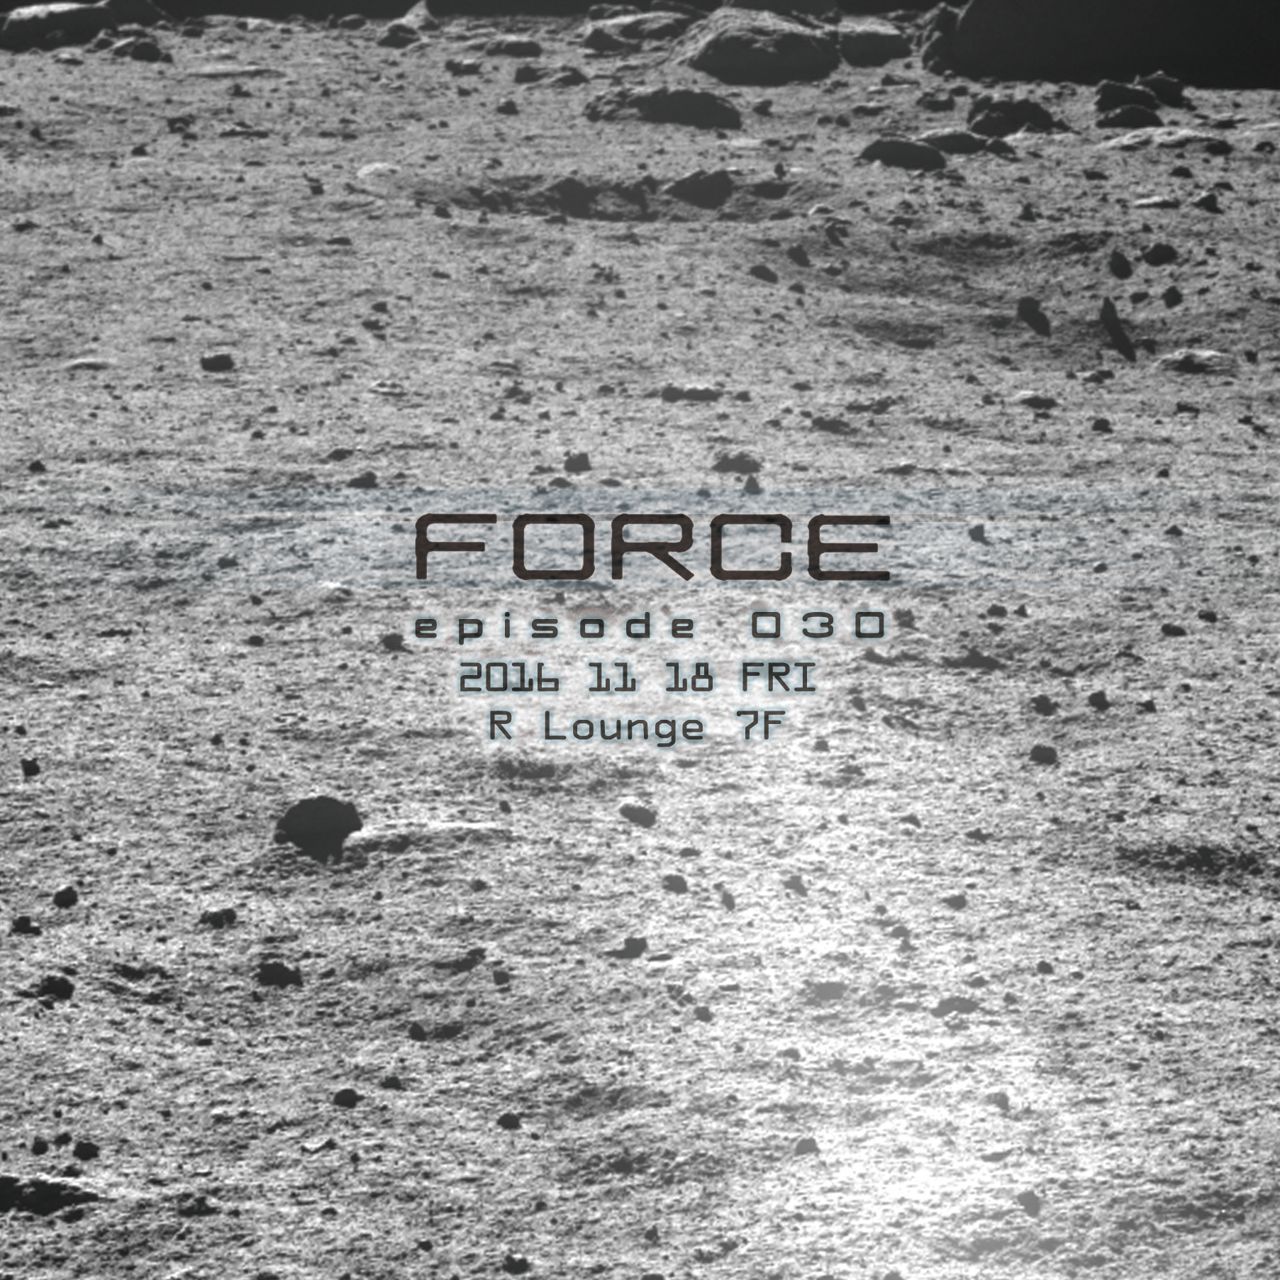 FORCE  episode 030 (7F)